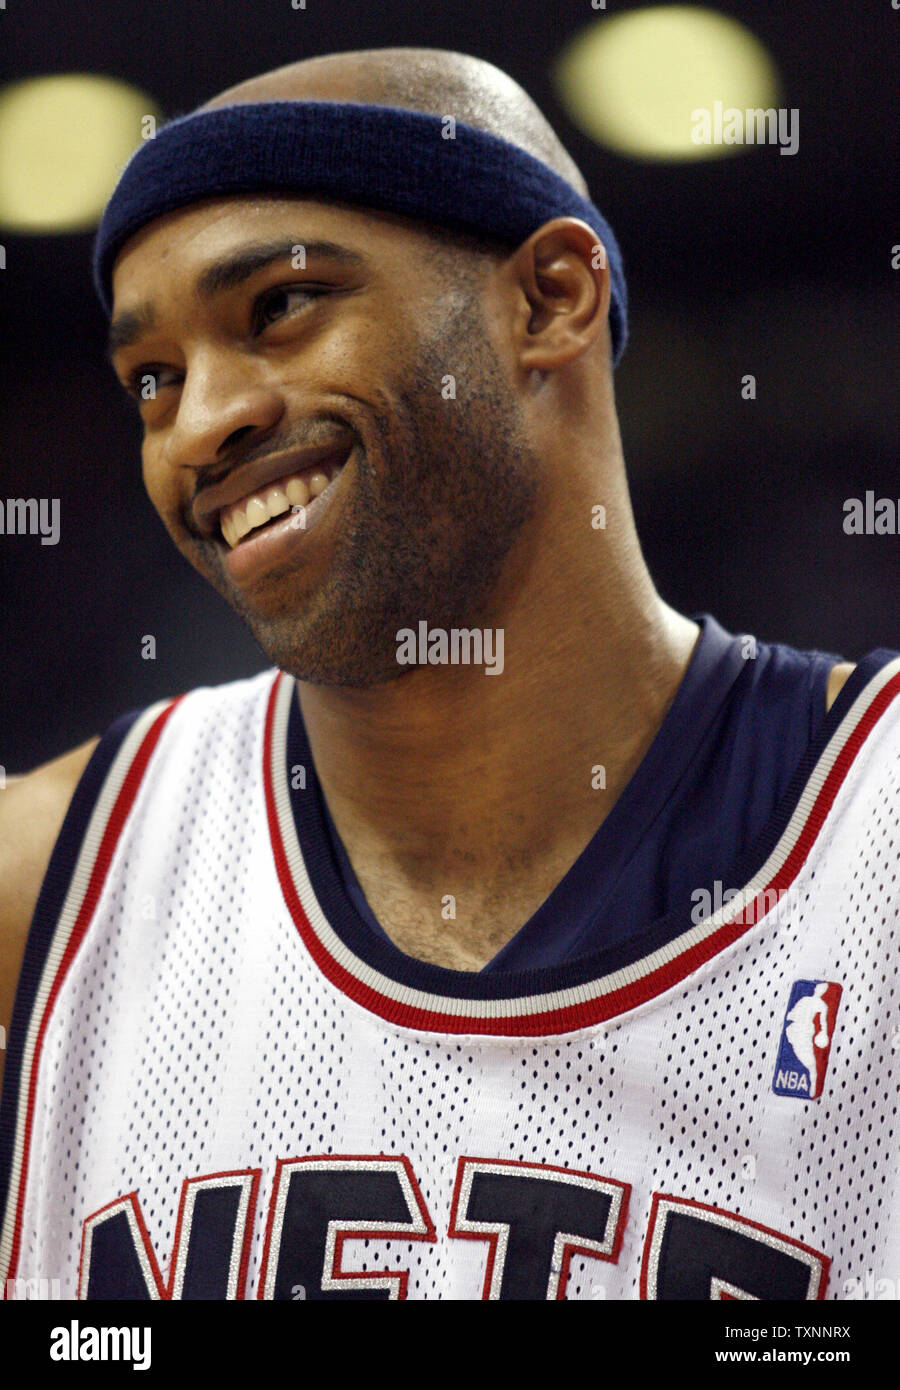 New Jersey Nets guard Vince Carter puases for a laugh against the Detroit Pistons in the second quarter at the Palace of Auburn Hills in Auburn, Mi on February 14, 2006.  (UPI Photo/Scott R. Galvin) Stock Photo